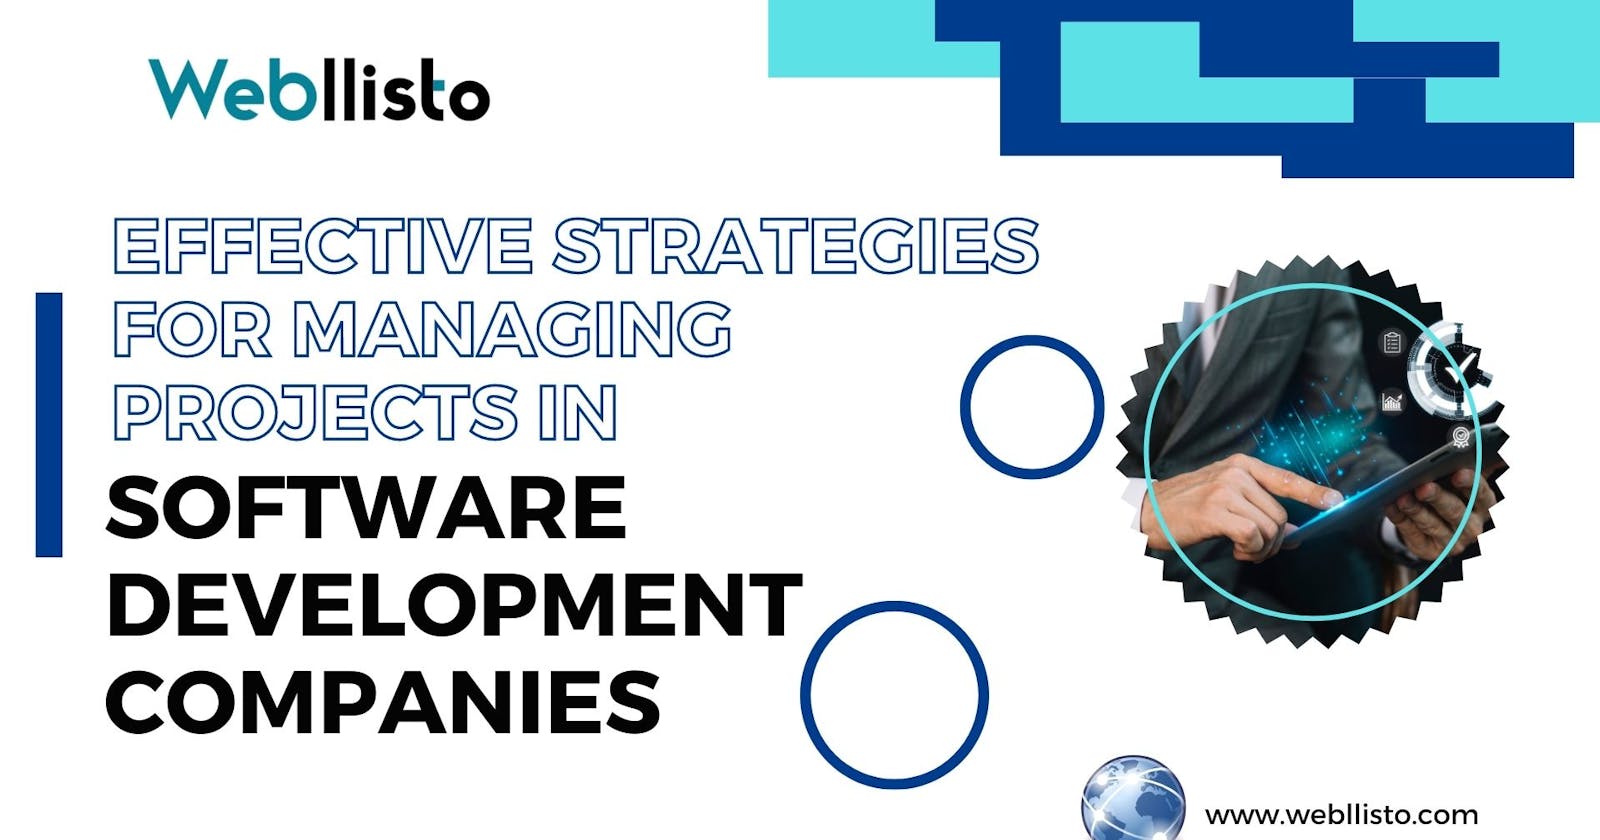 Effective Strategies for Managing Projects in Software Development Companies